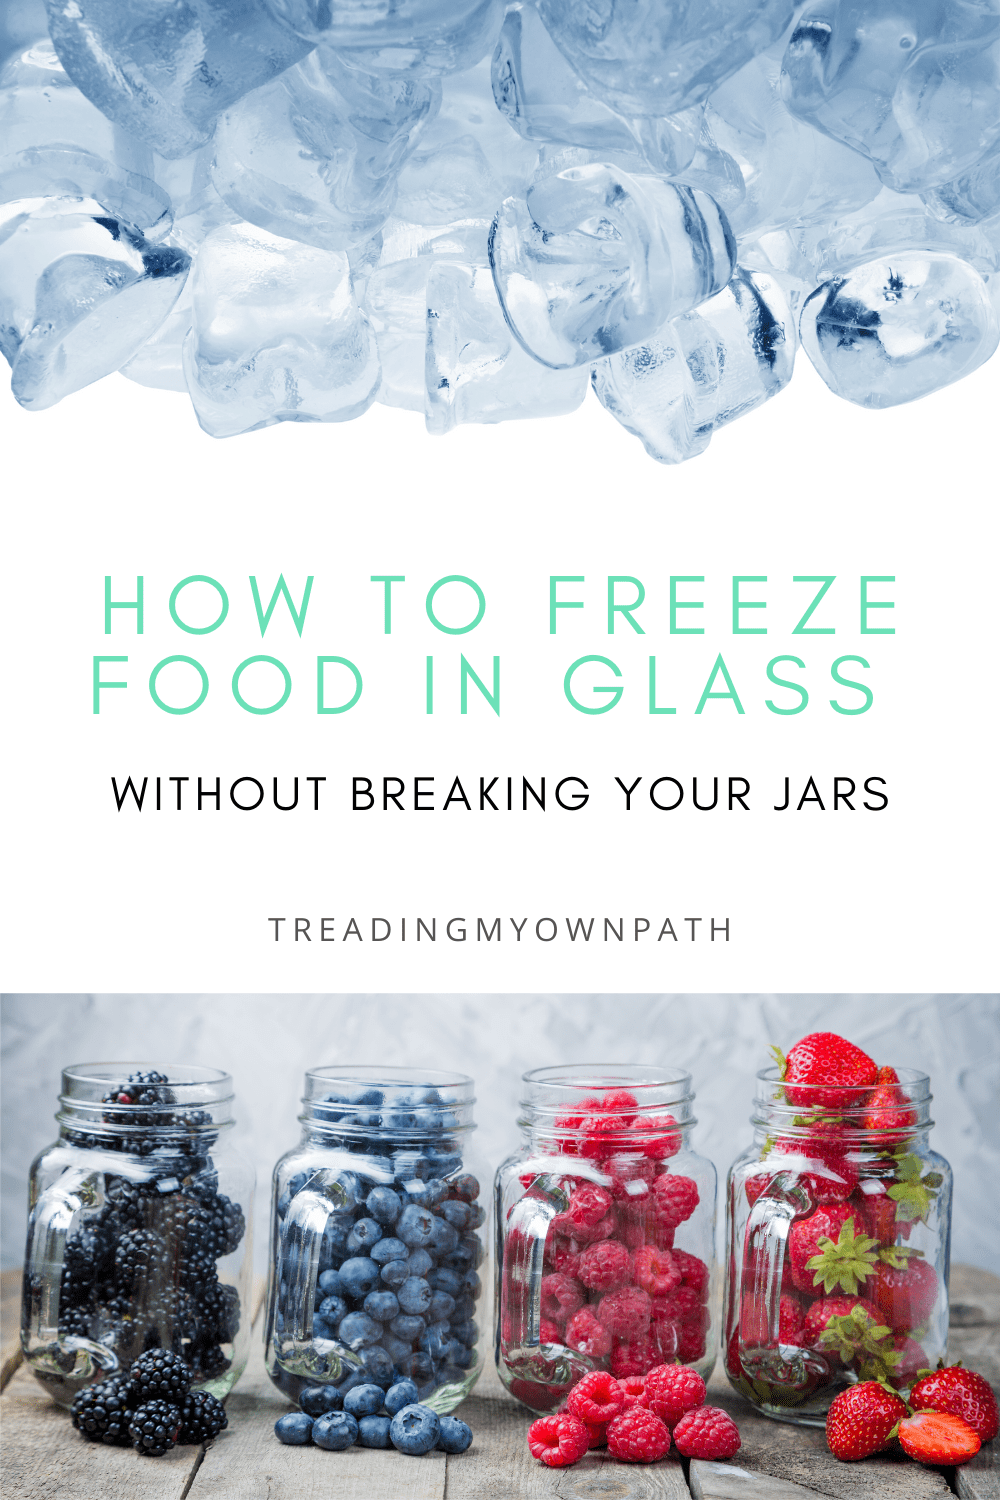 How to freeze food in glass jars (+ defrost it safely)